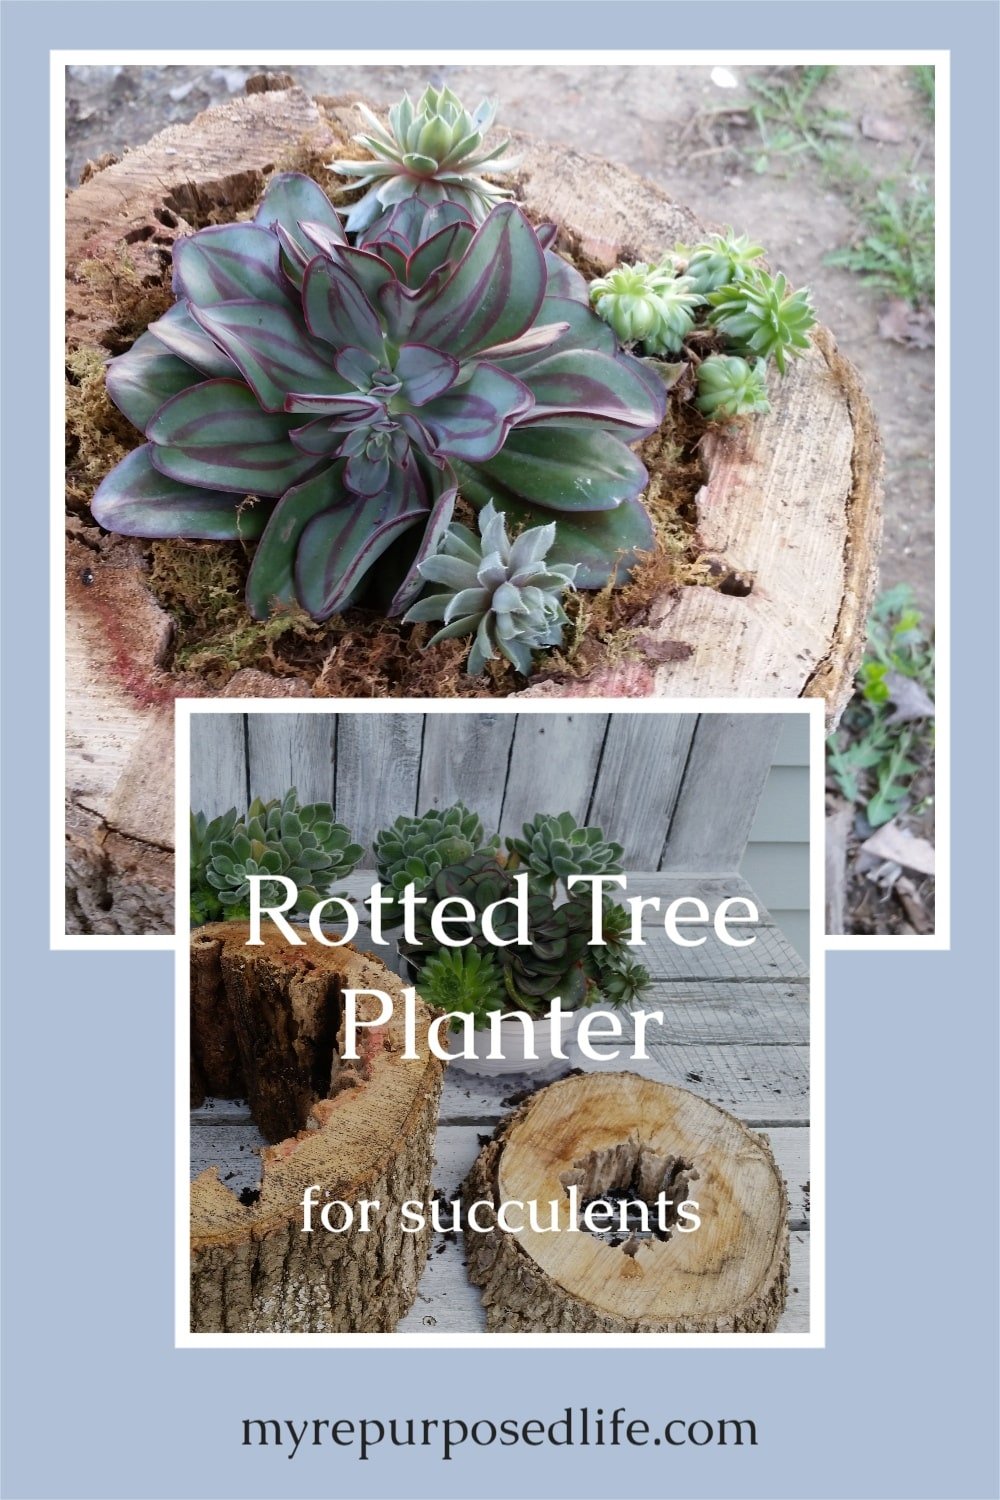 Make unique succulent planters out of old and rotted tree trunks. Tree stumps and wood slices that are rotten are perfect for planting succulents. #MyRepurposedLife #succulents #planter #diy #tree #trunk #stump via @repurposedlife